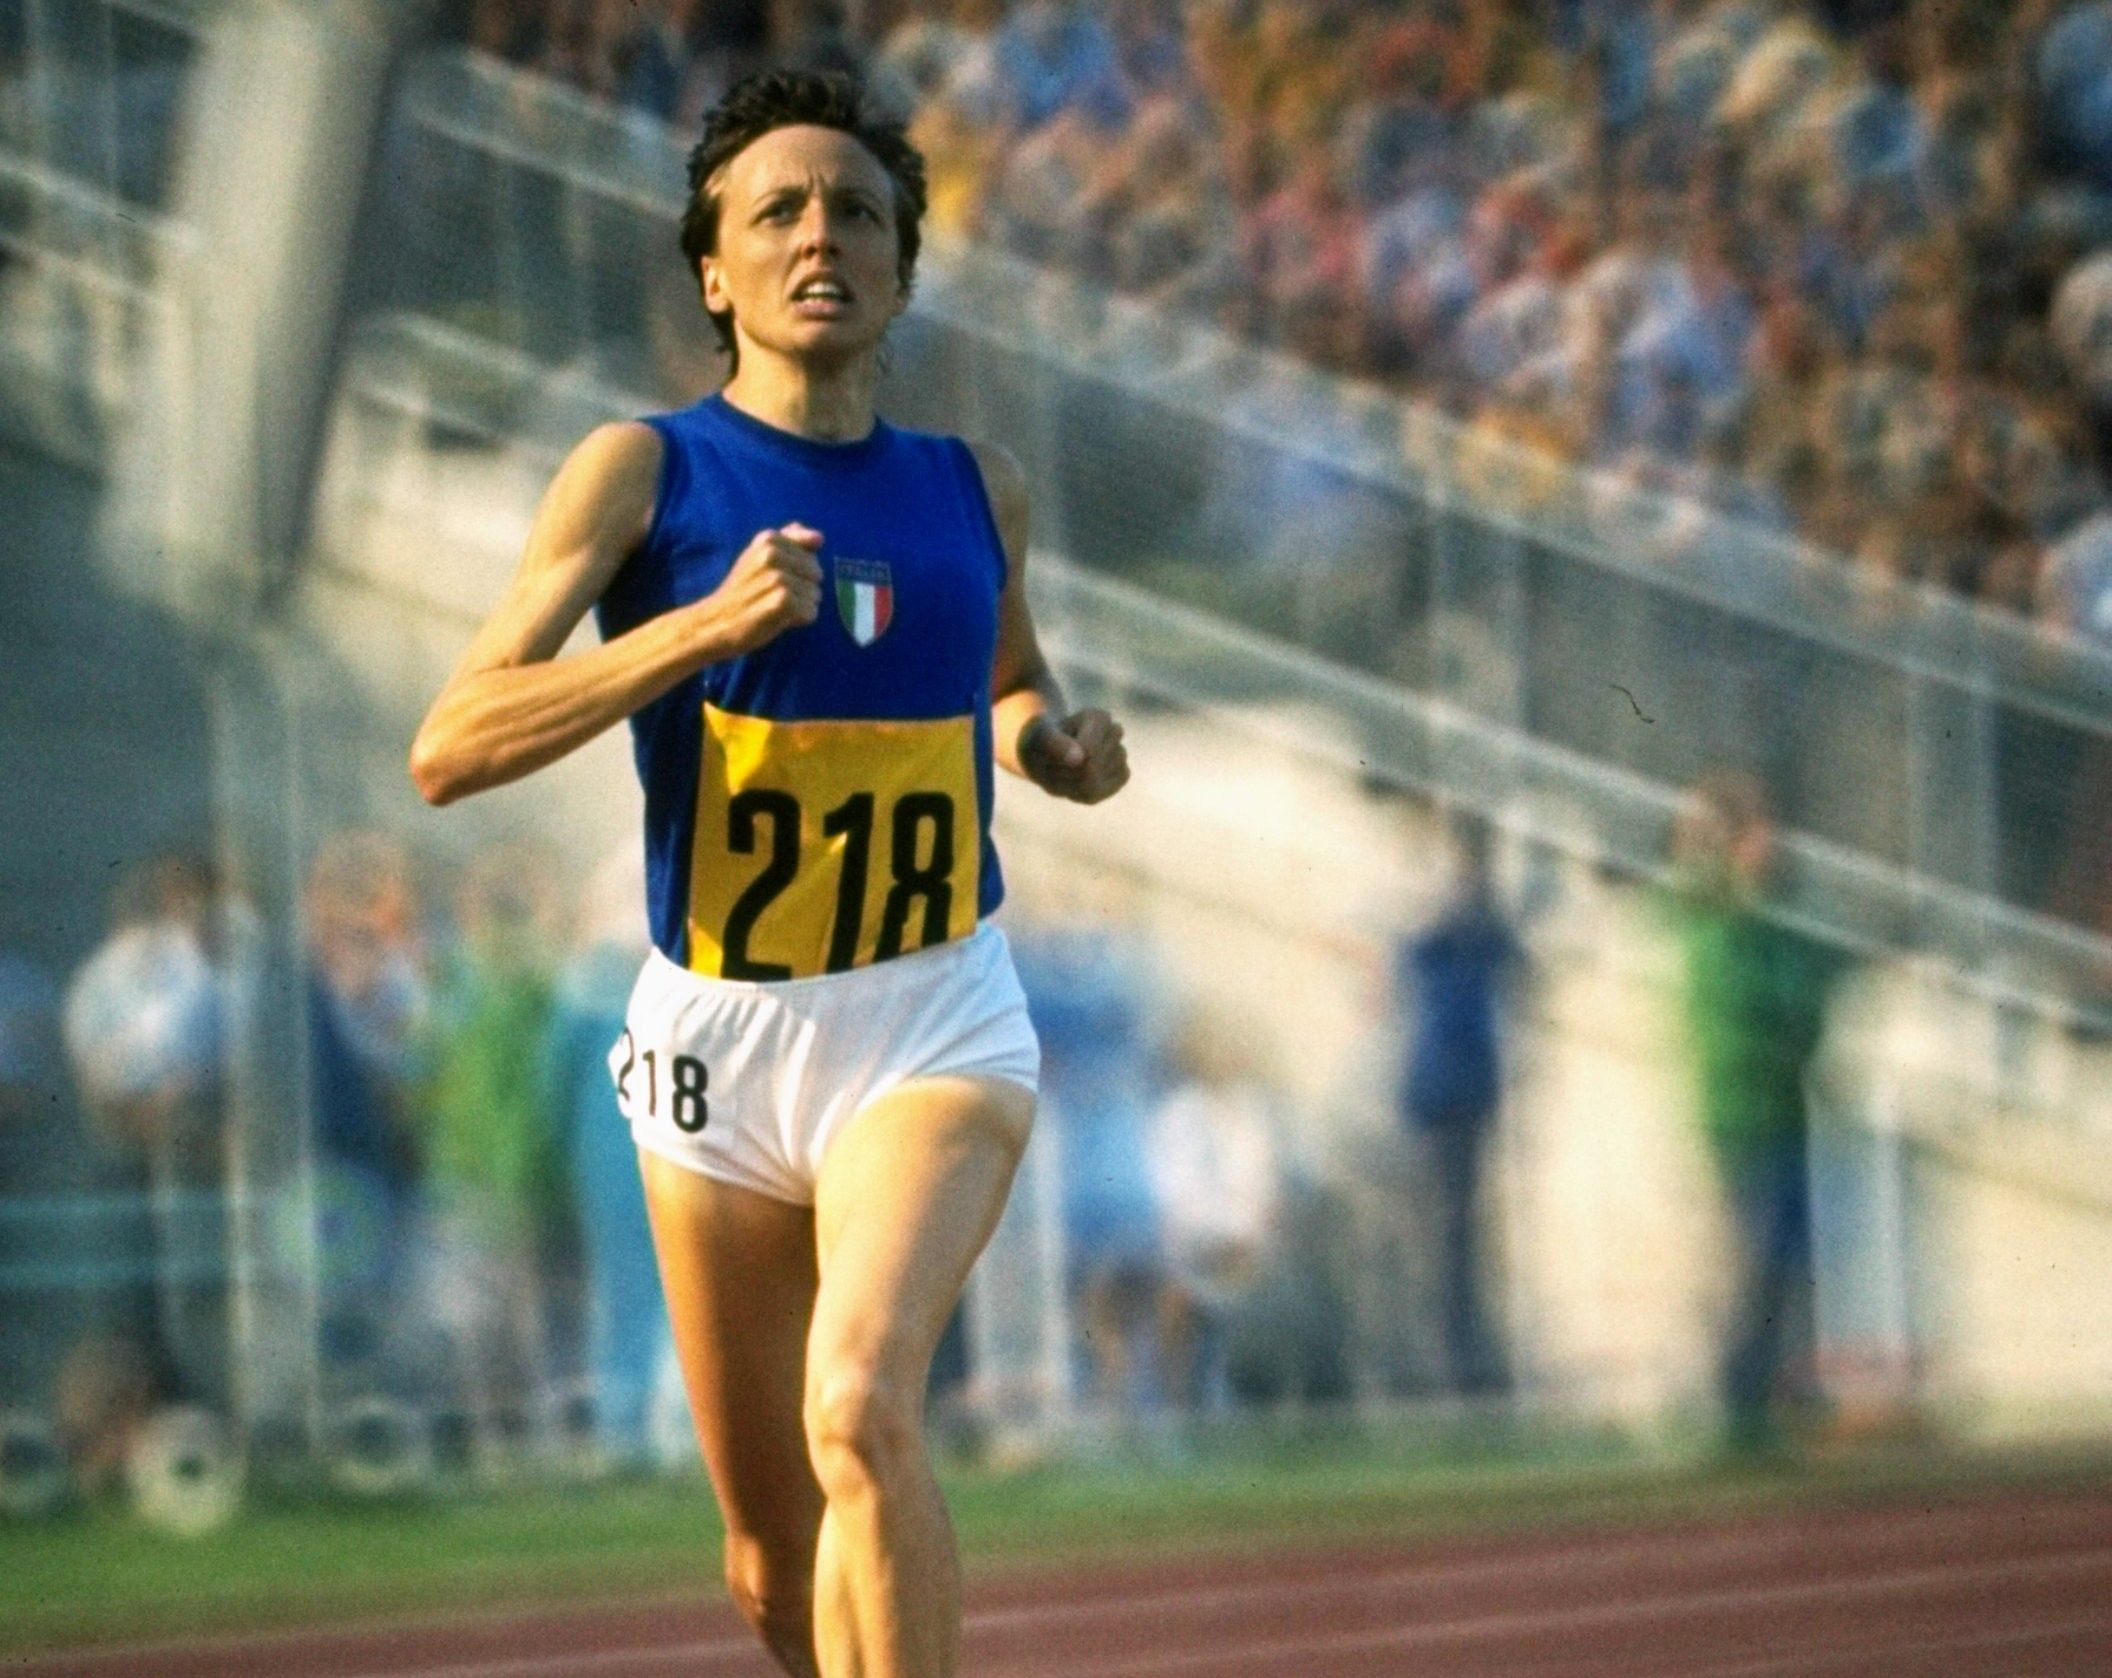 Paola Pigni of Italy during the 1972 Olympic Games 1500m in Munich